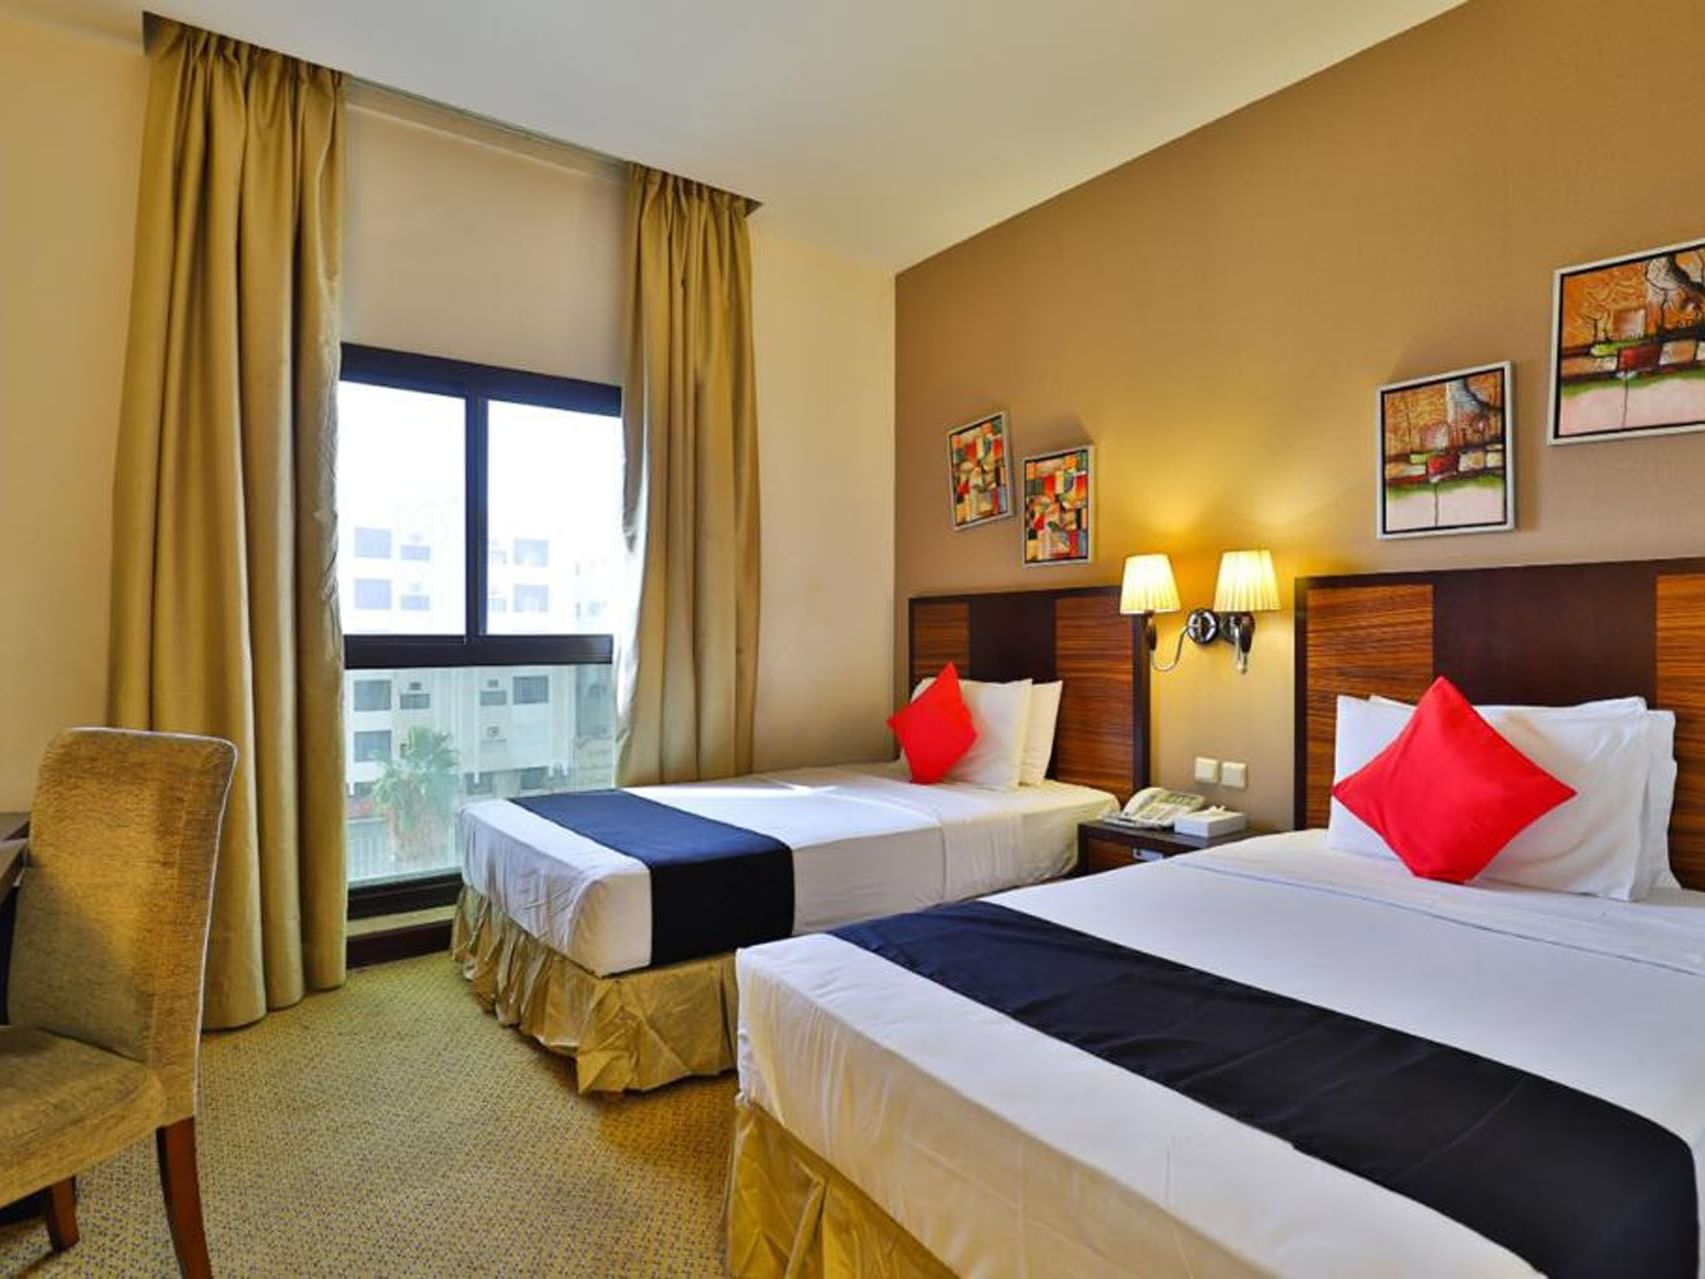 Standard room with twin beds and red pillow at Mena Hotel Taif